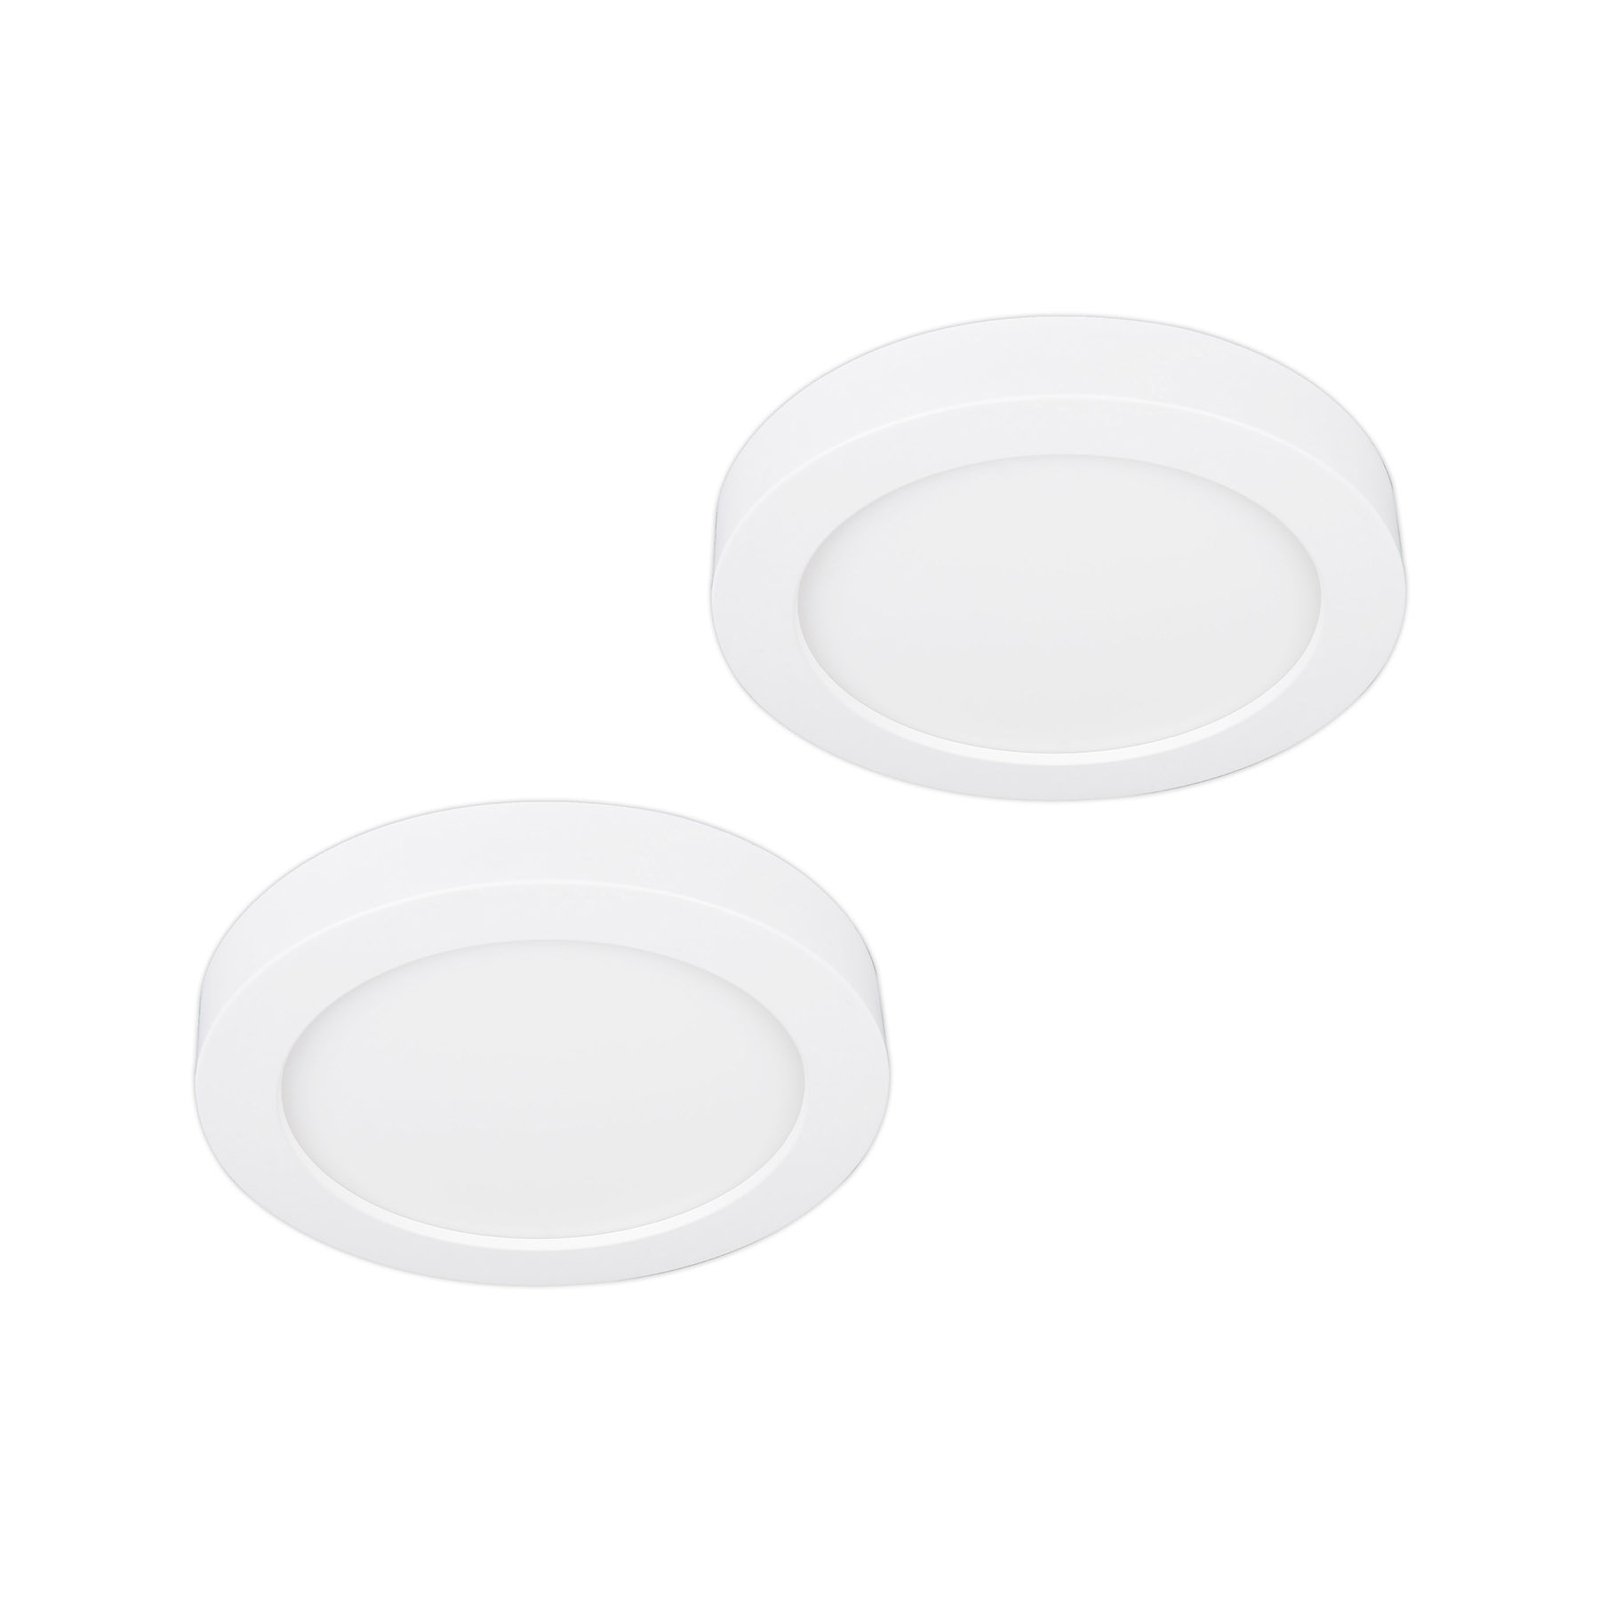 Prios LED ceiling lamp Edwina, white, 17.7cm, 2pcs, dimmable